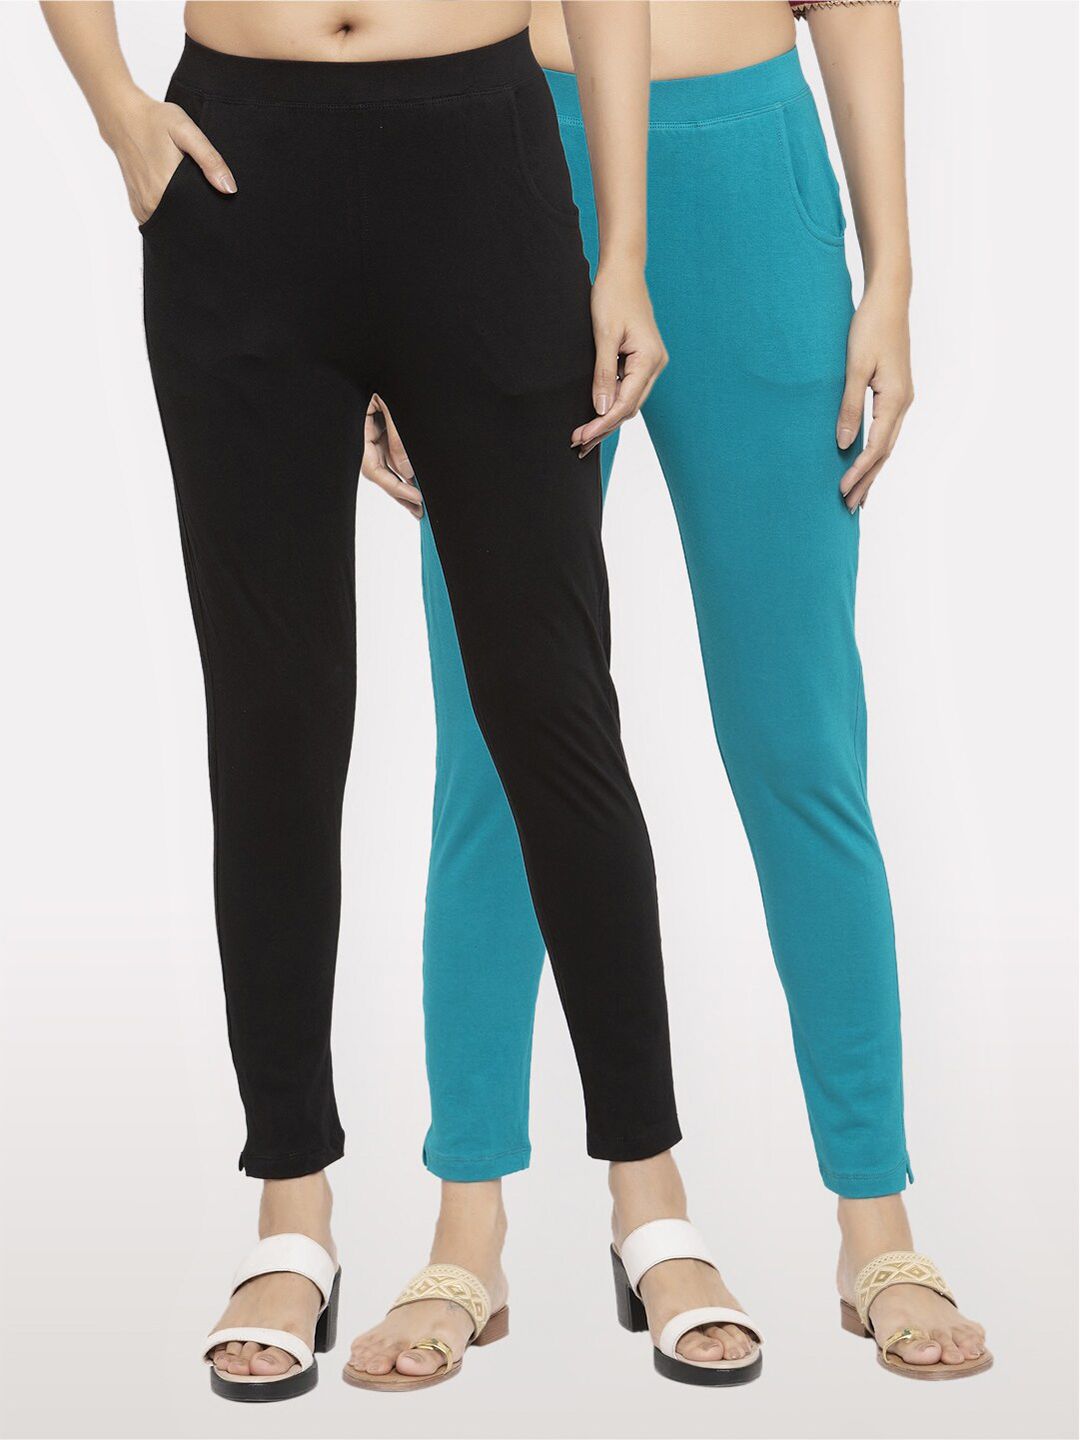 NEUDIS Women Pack of 2 Black and Teal Ankle Length Jeggings Price in India